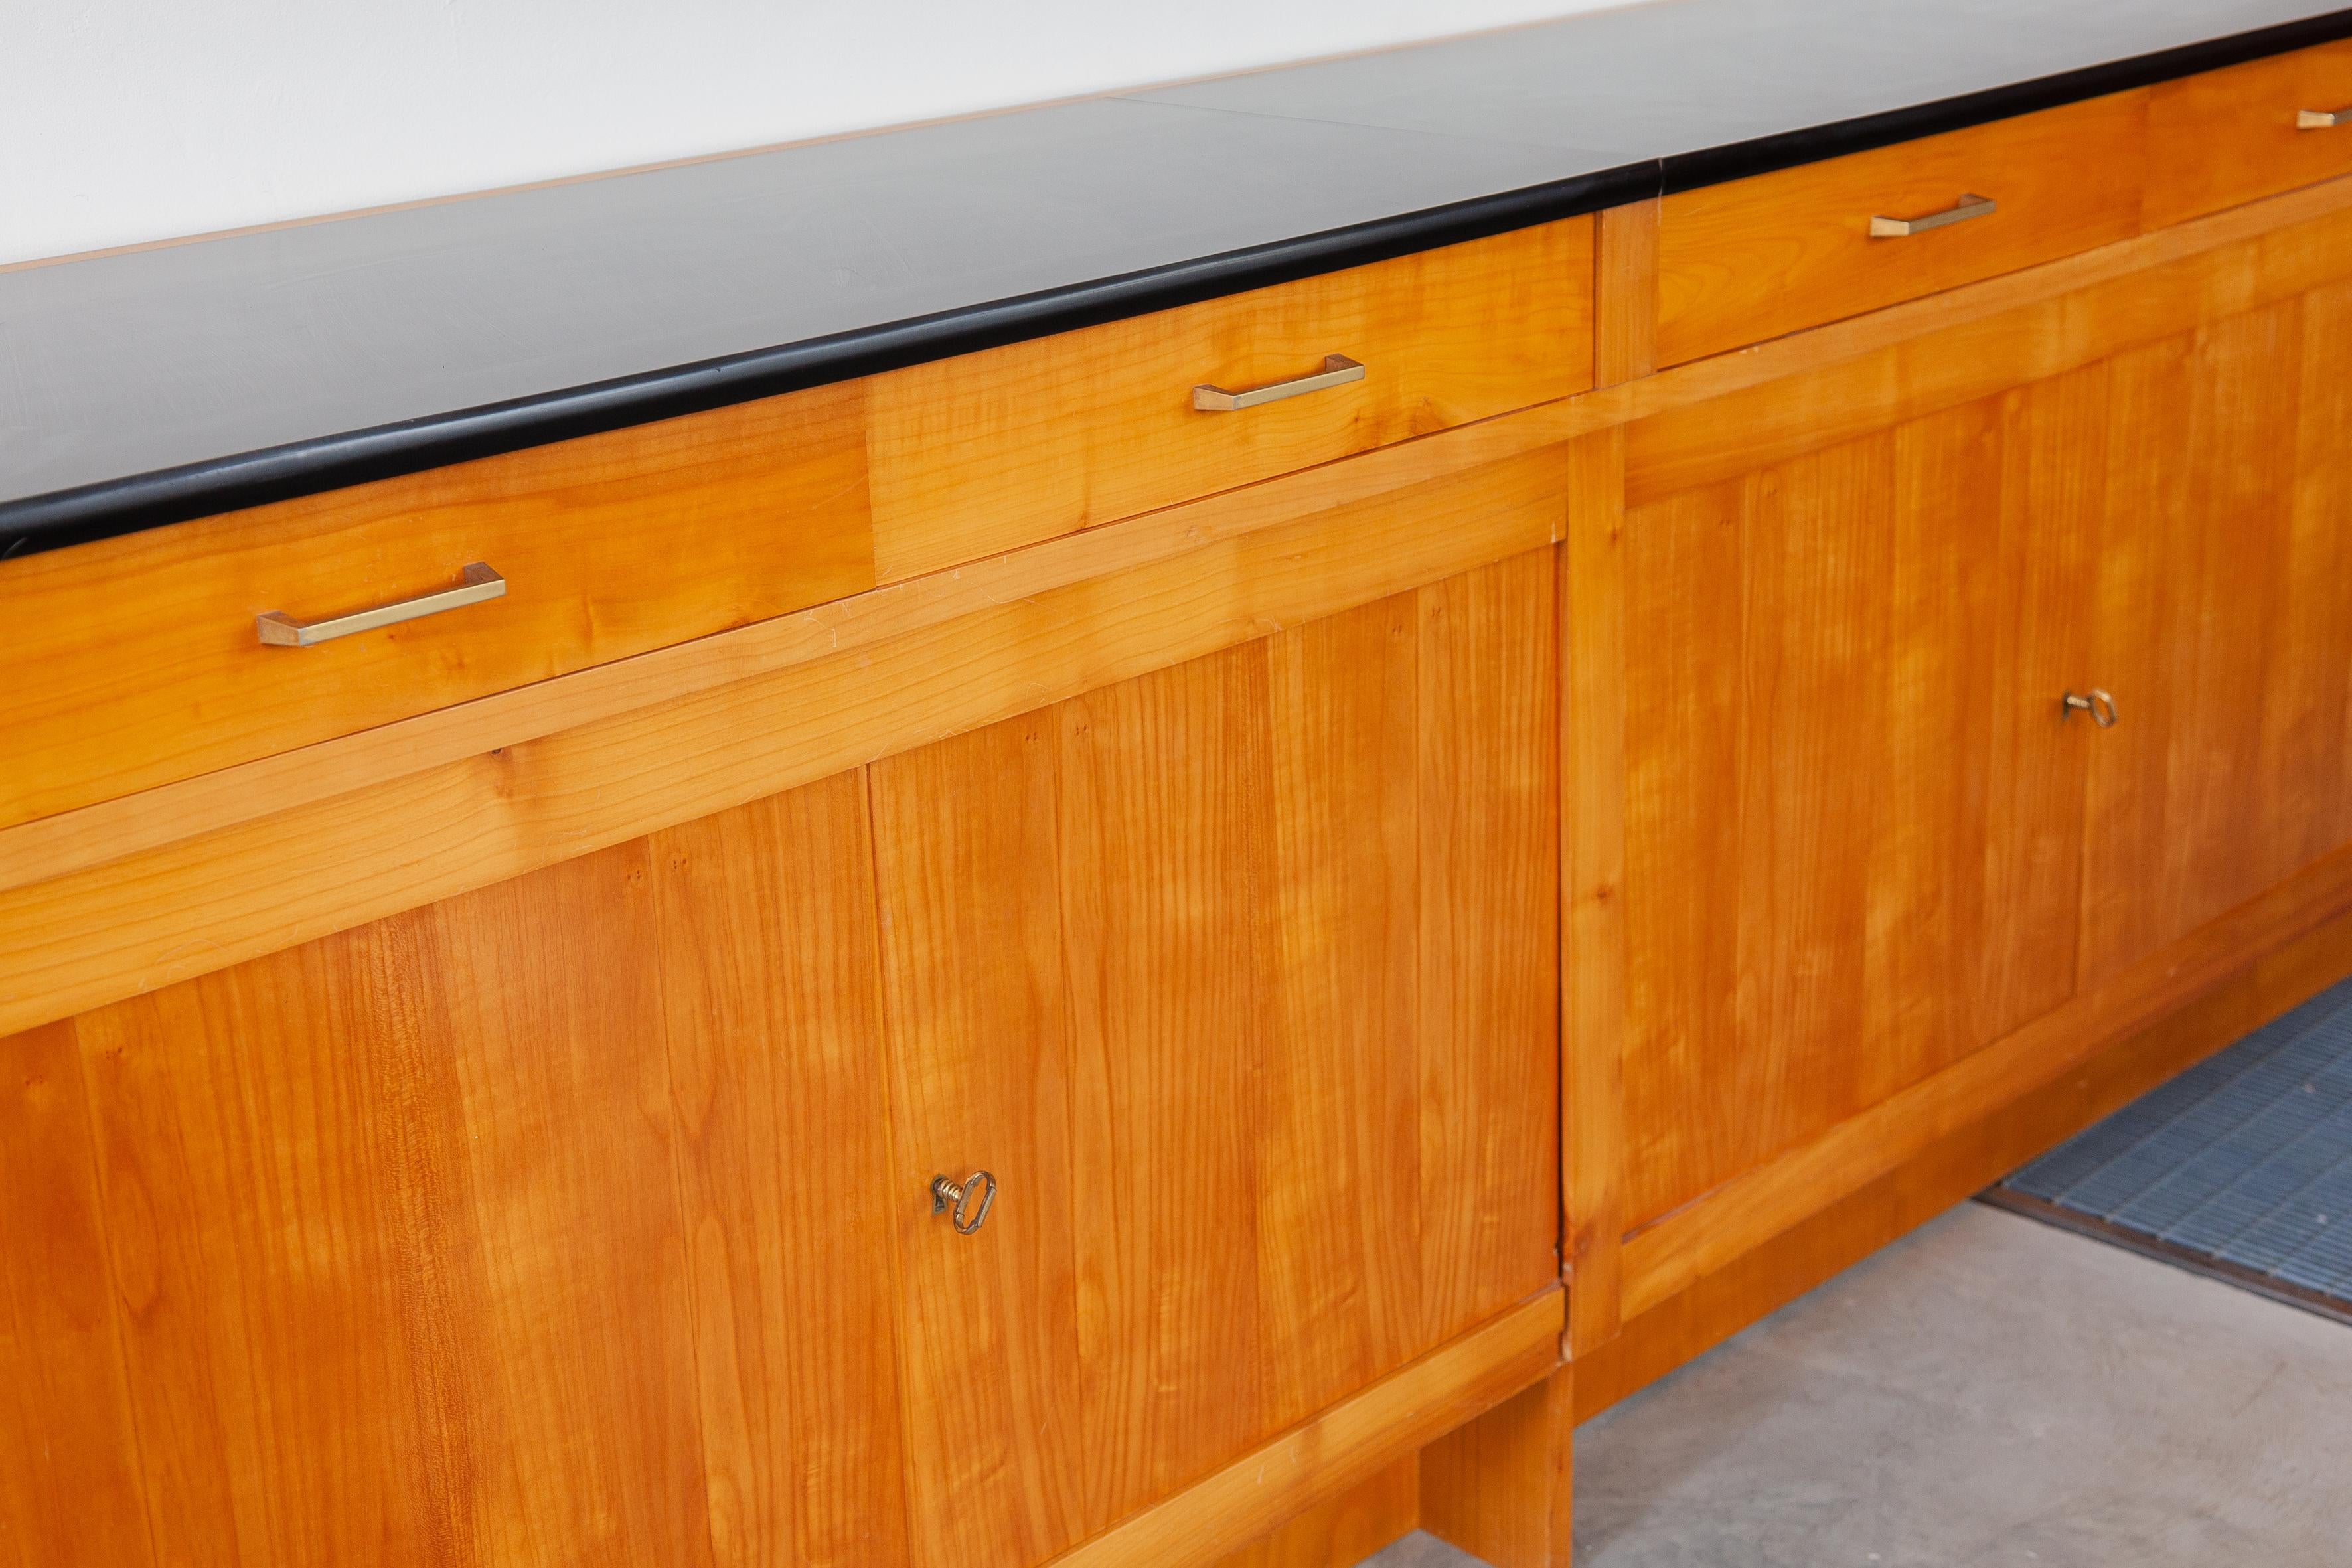 Belgian Large Sideboard in Ash Wood, 1960s For Sale